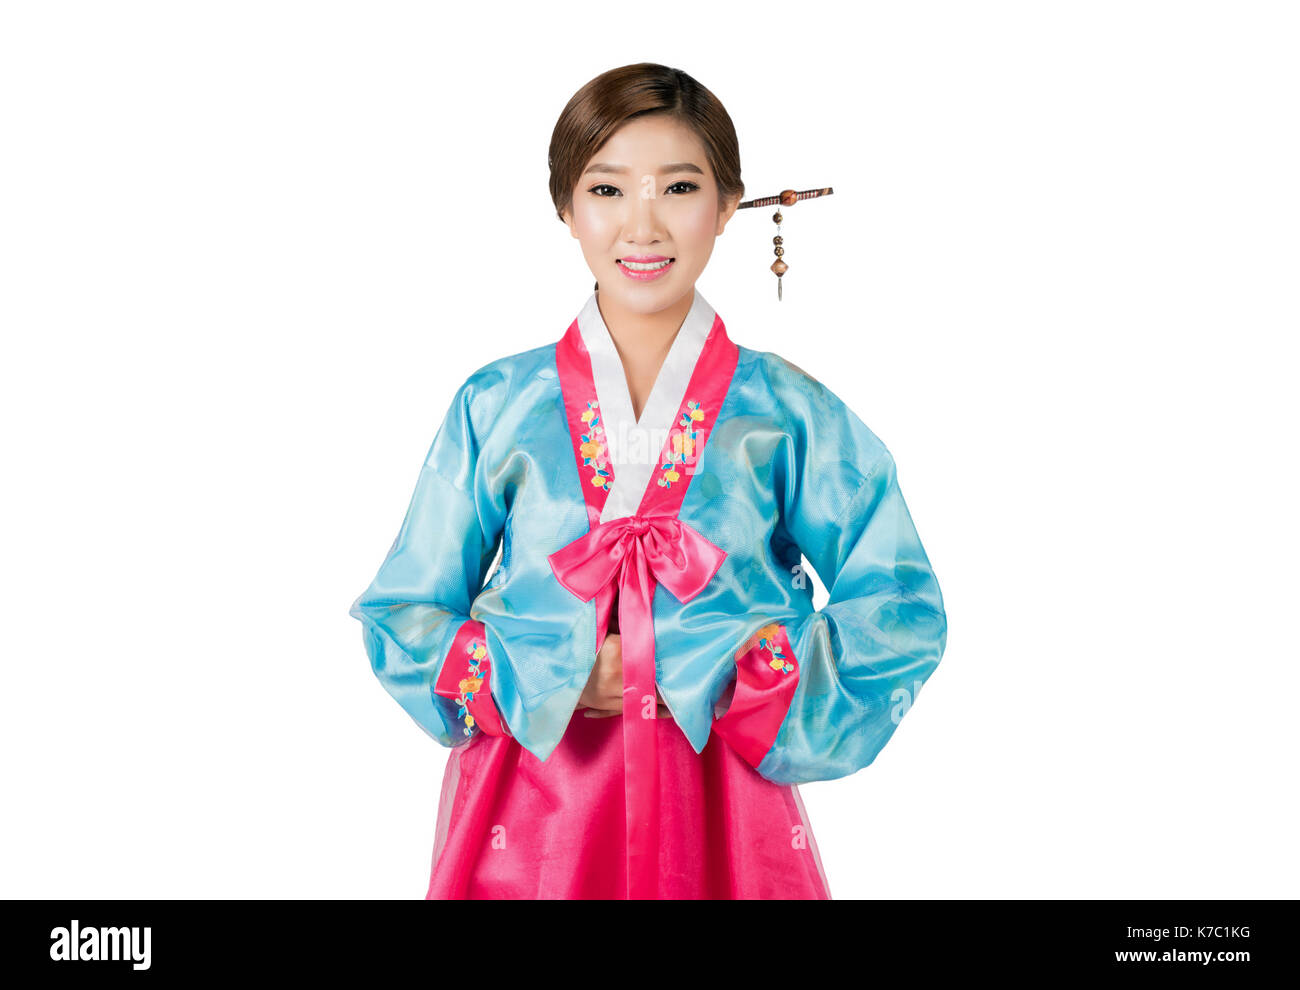 Korean Woman With Hanbok, The Traditional Korean Dress In White Stock ...